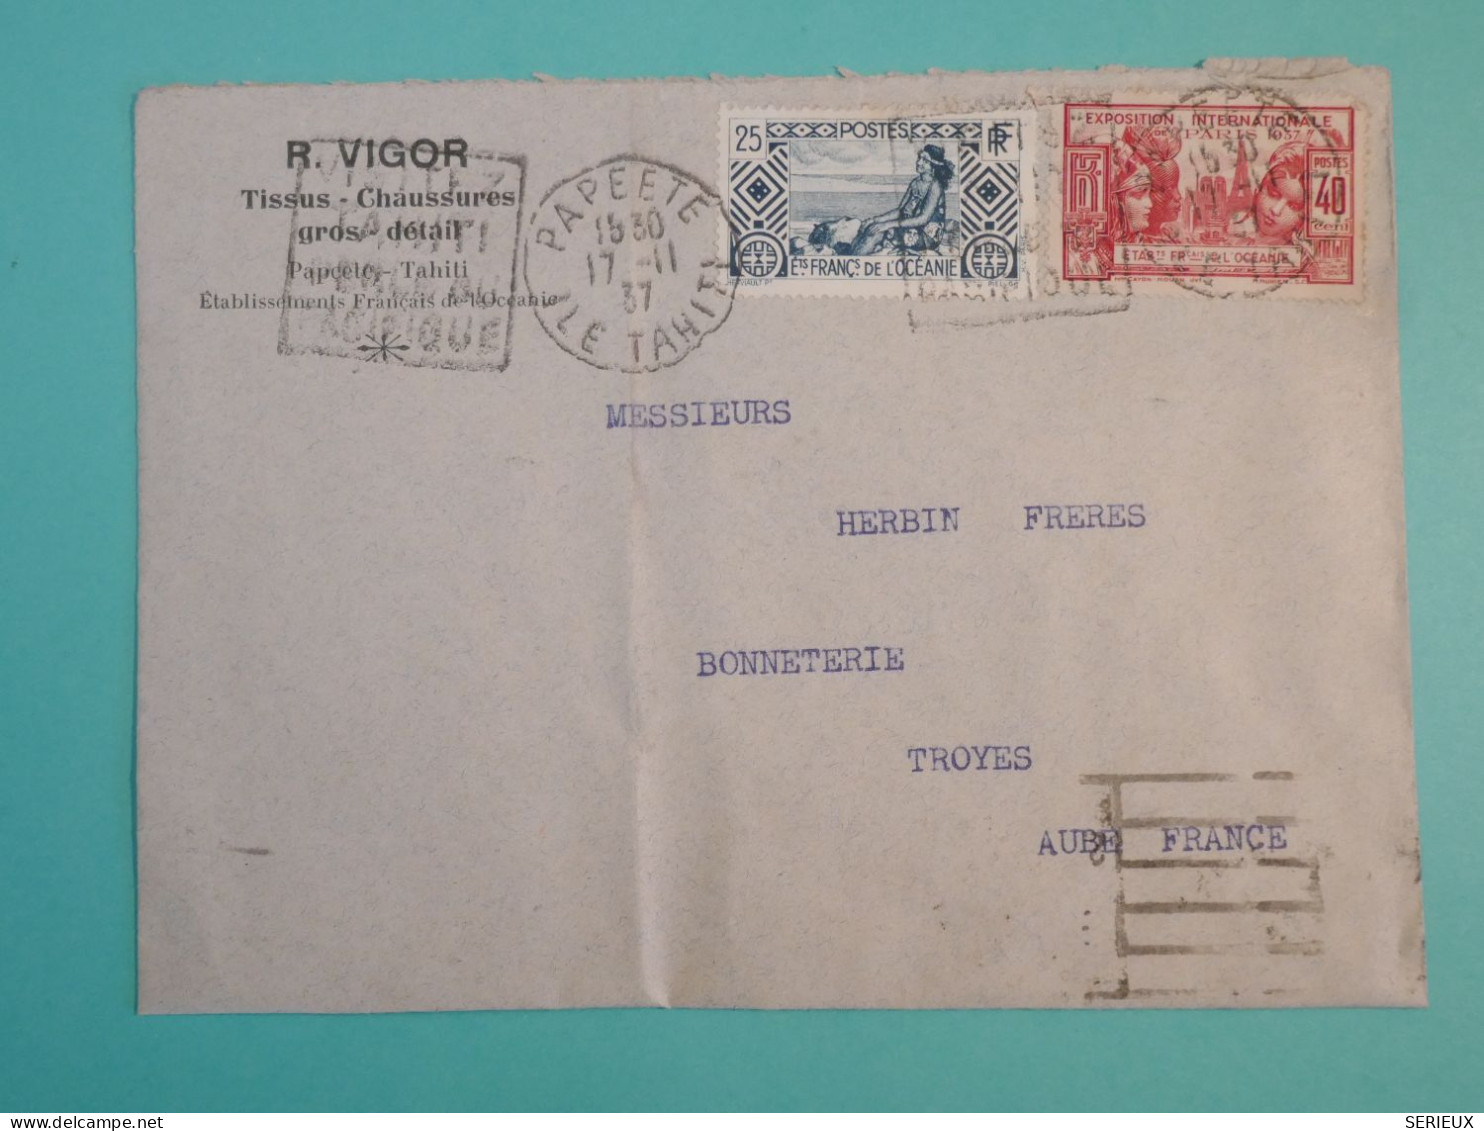 DK 11  ETS OCEANIE  BELLE LETTRE PRIVEE 1937 PAPEETE A   TROYES  FRANCE  + +AFF. INTERESSANT++ ++ + - Covers & Documents